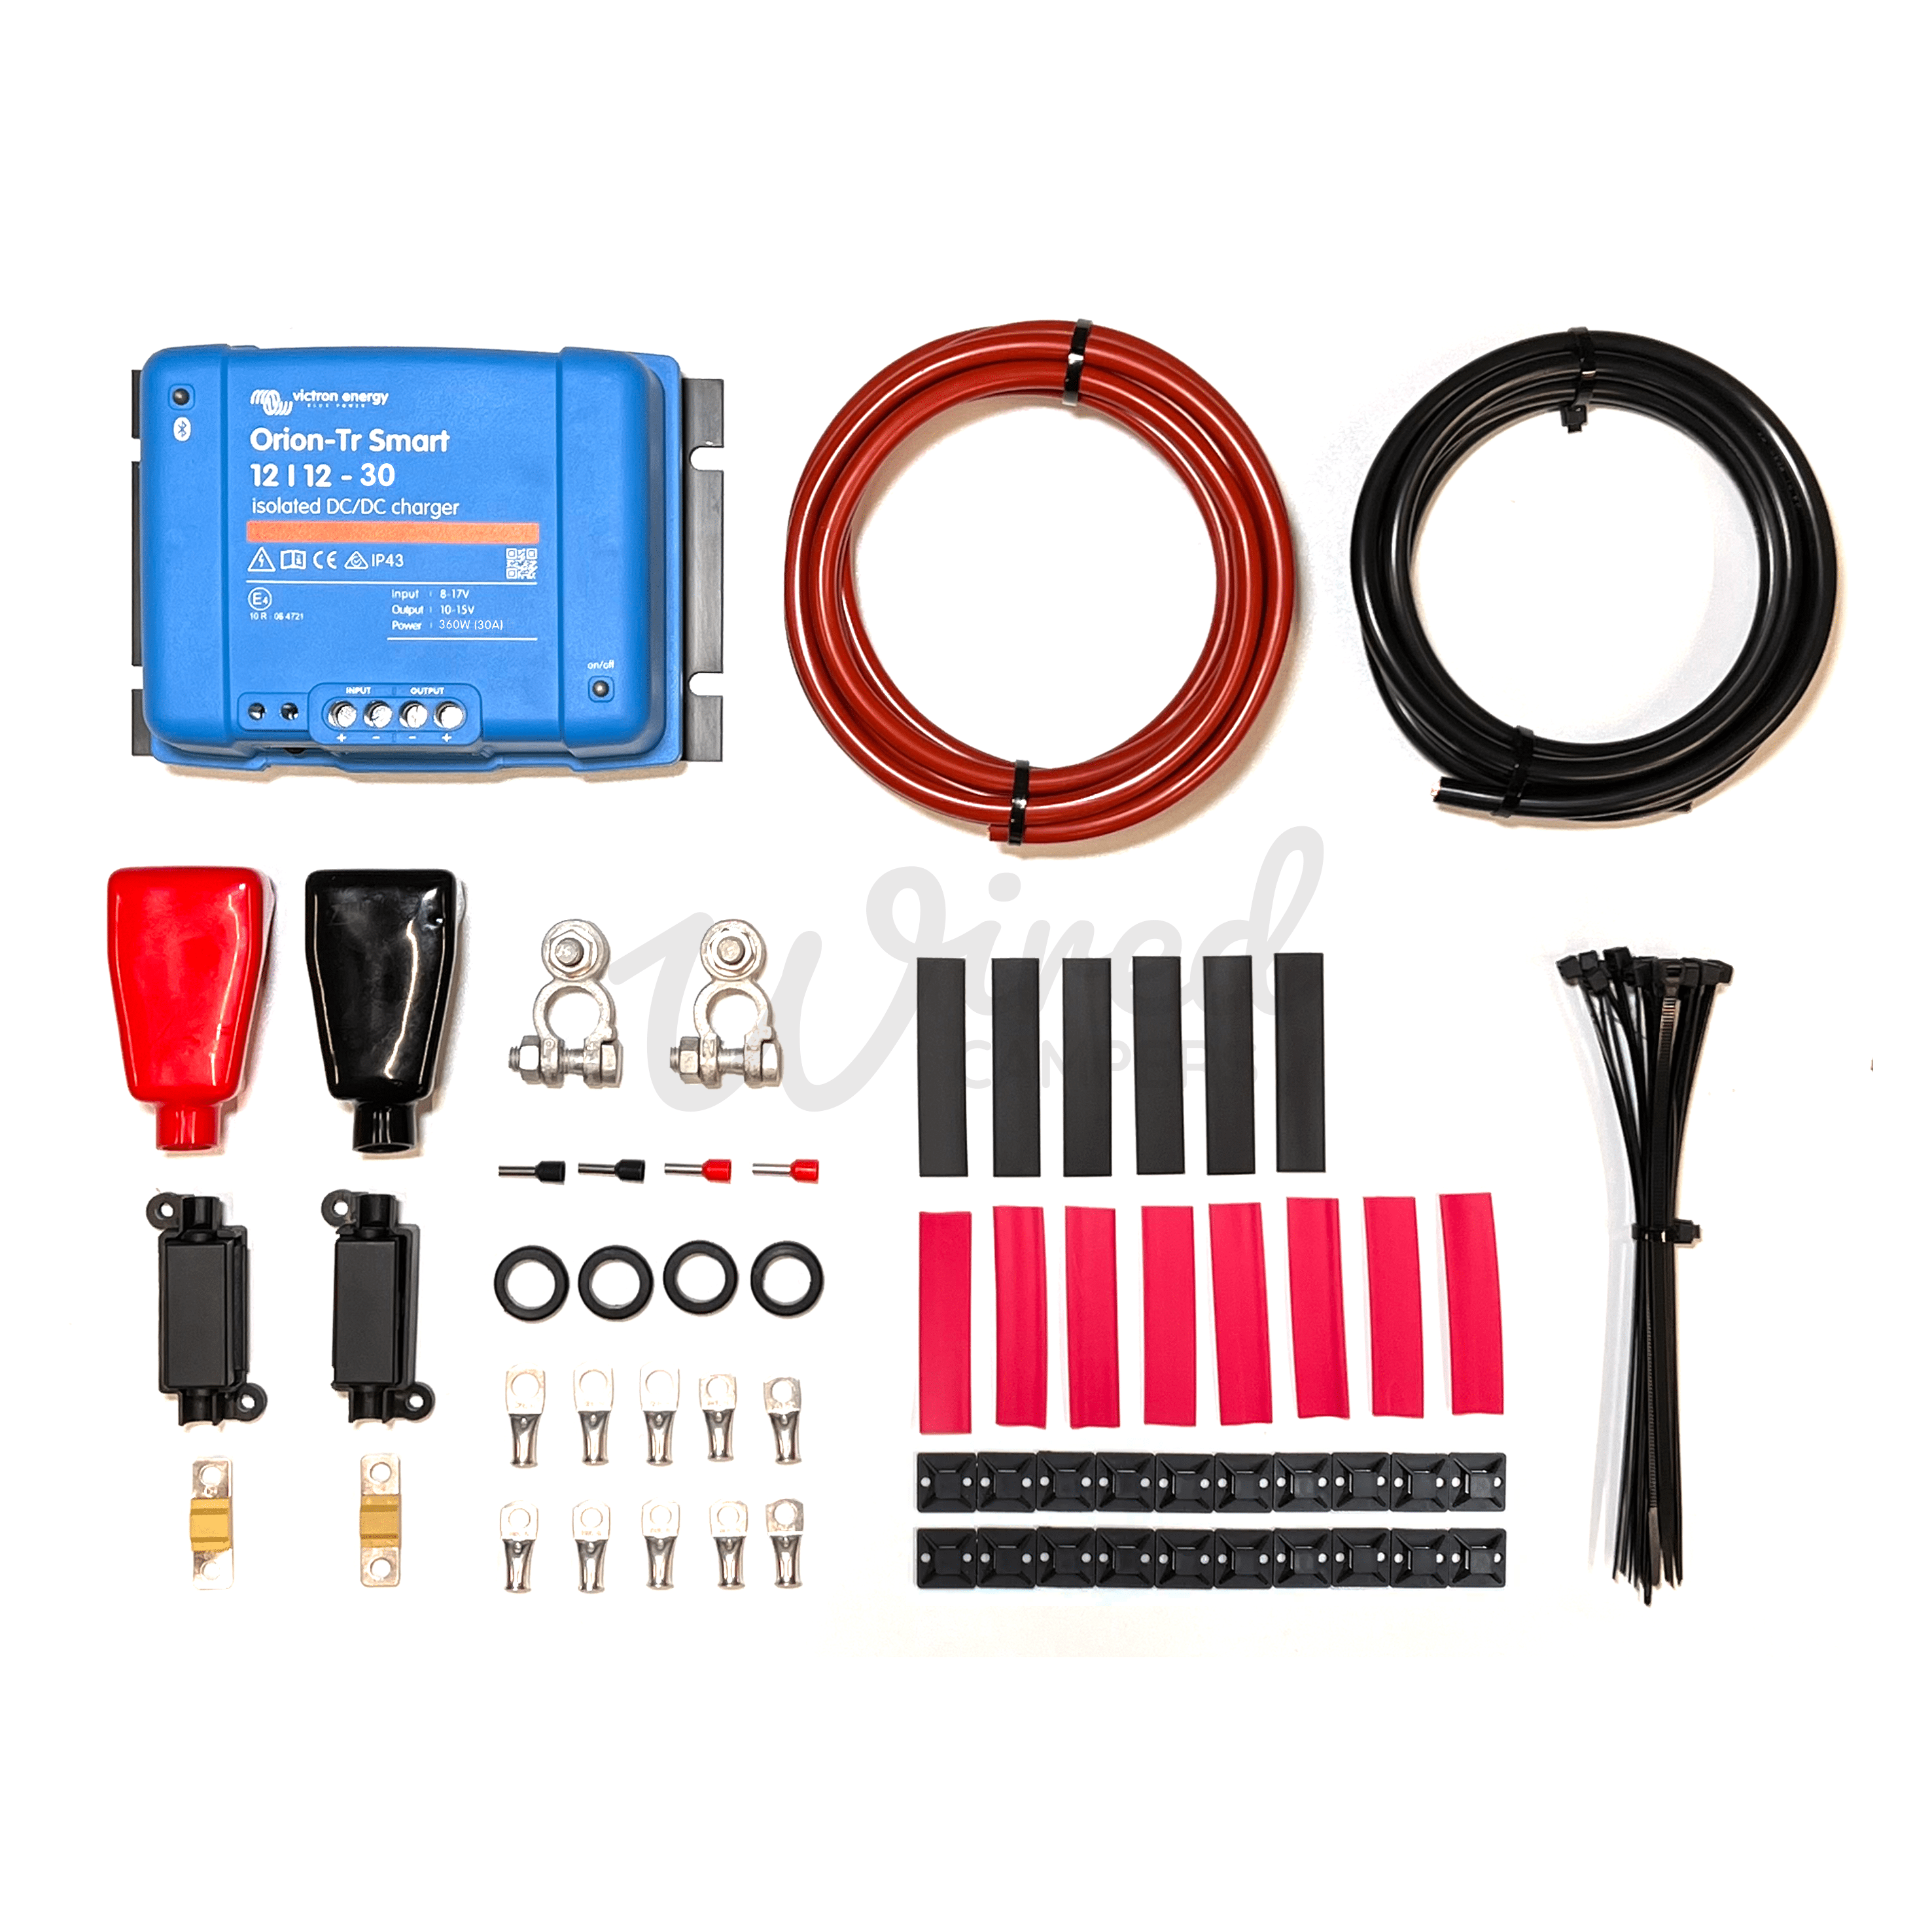 Wired Campers Limited 1M/3M/5M Victron Orion-Tr Smart DC-DC 12/12-30A DC-DC Charger Kit